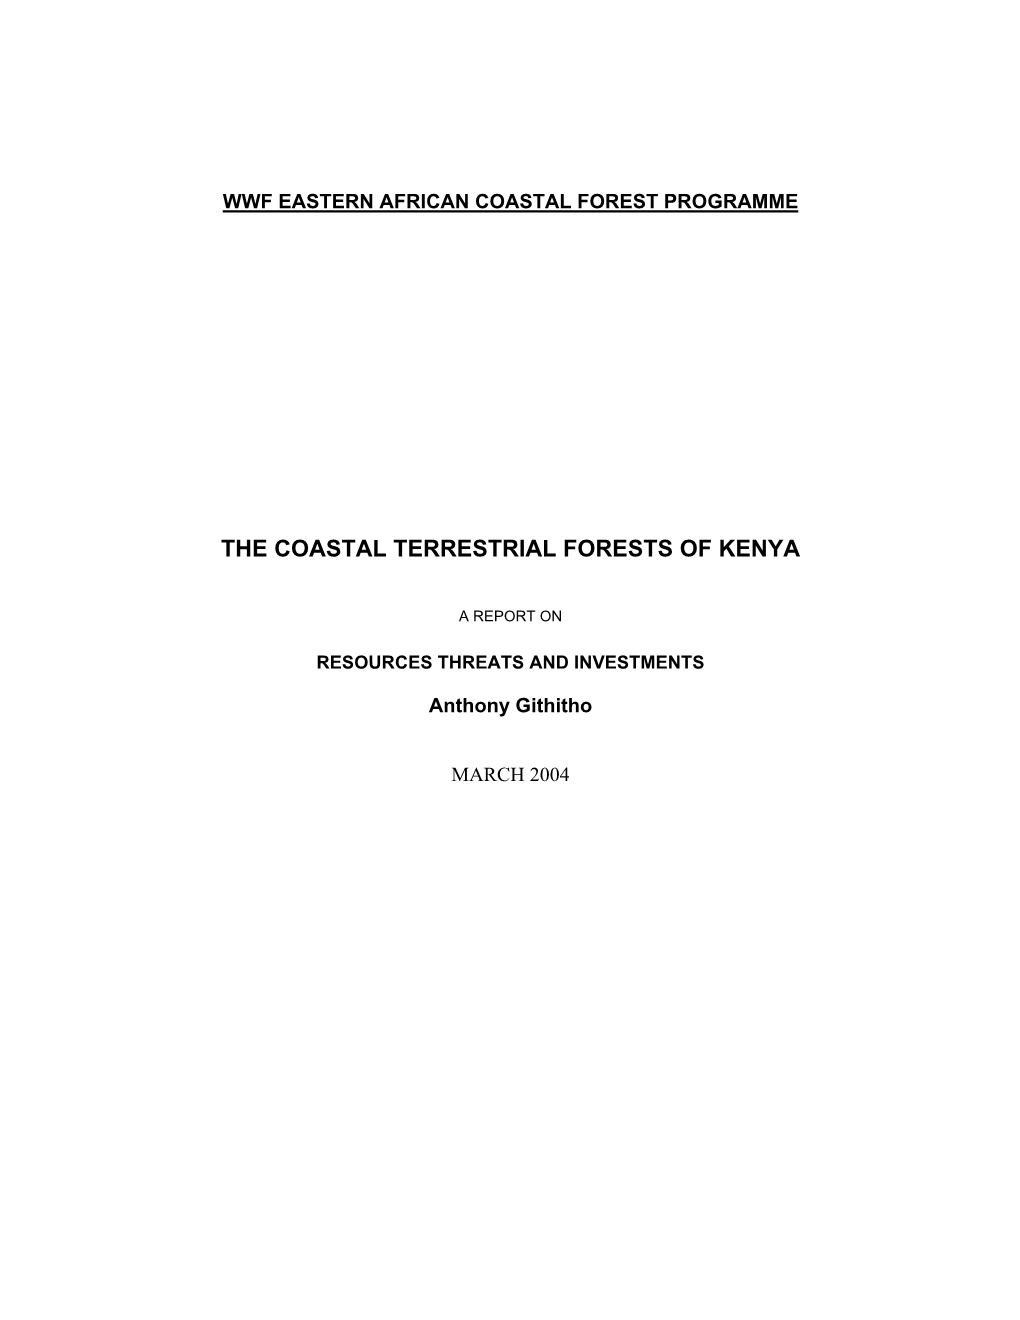 The Coastal Terrestrial Forest of Kenya, Resources Threats And